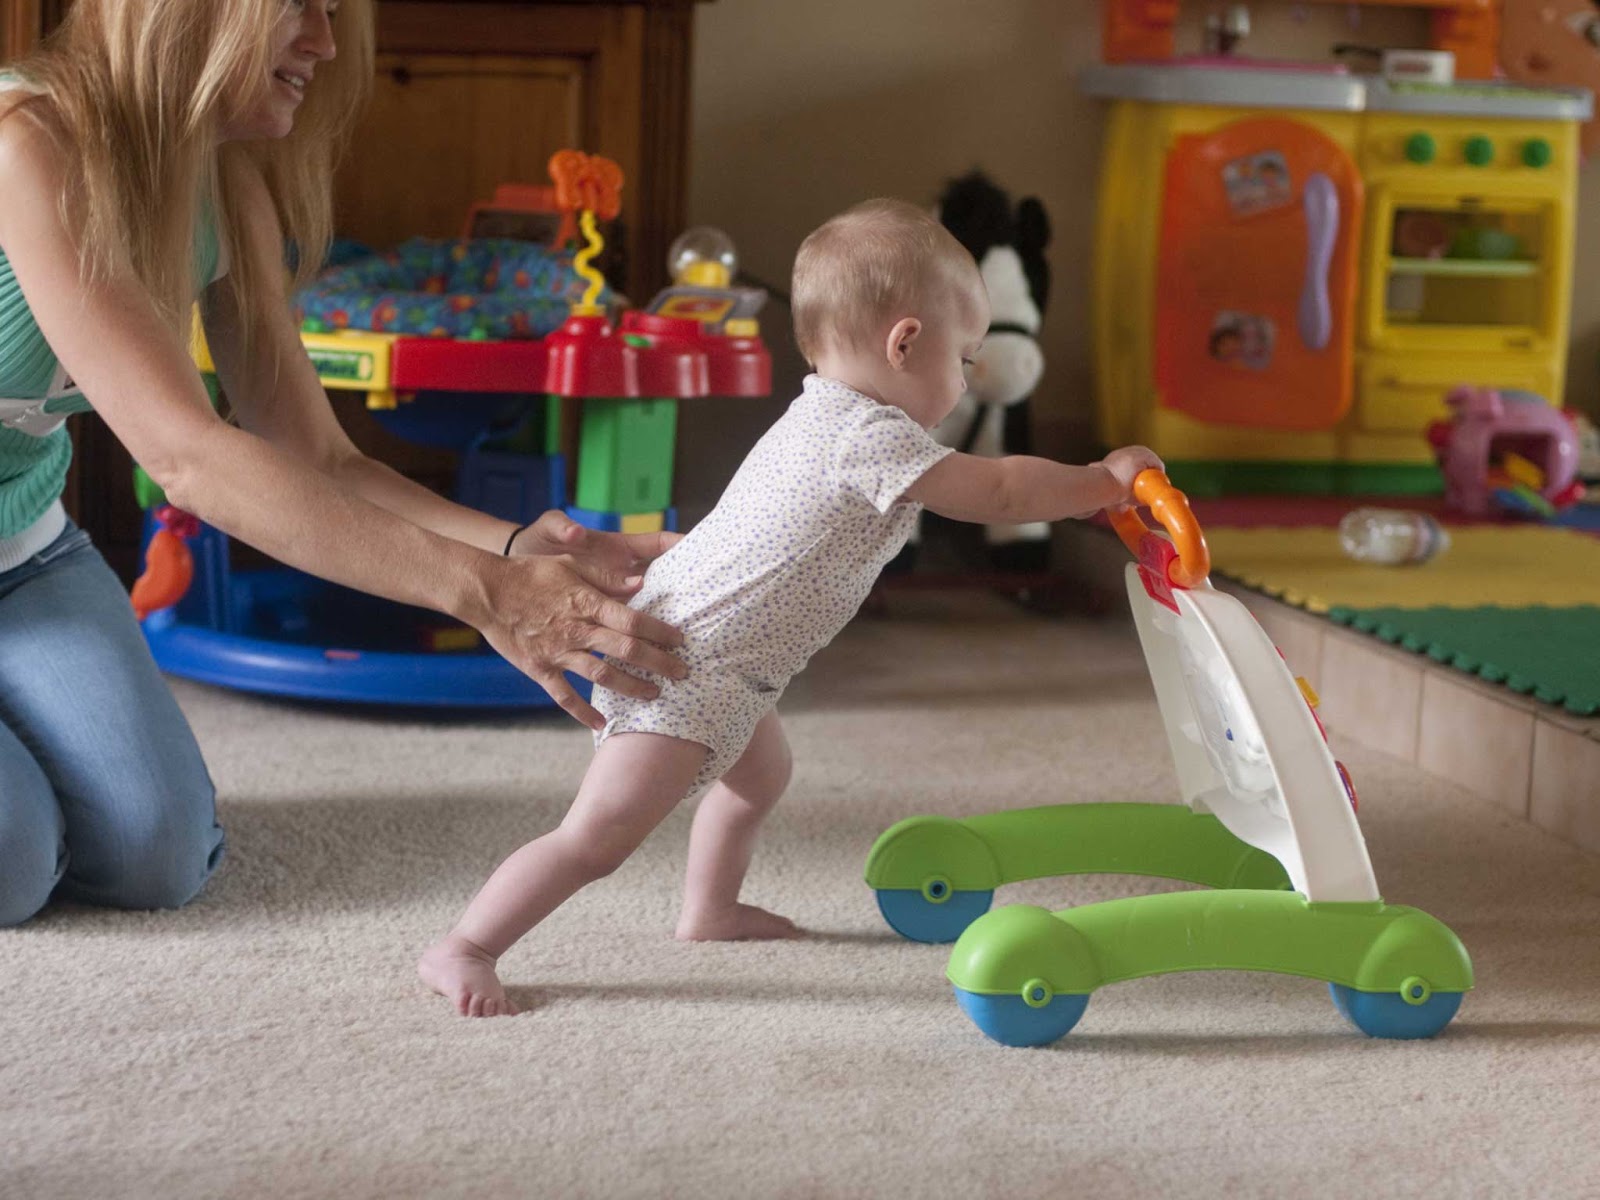 10 month old baby pushing a toy